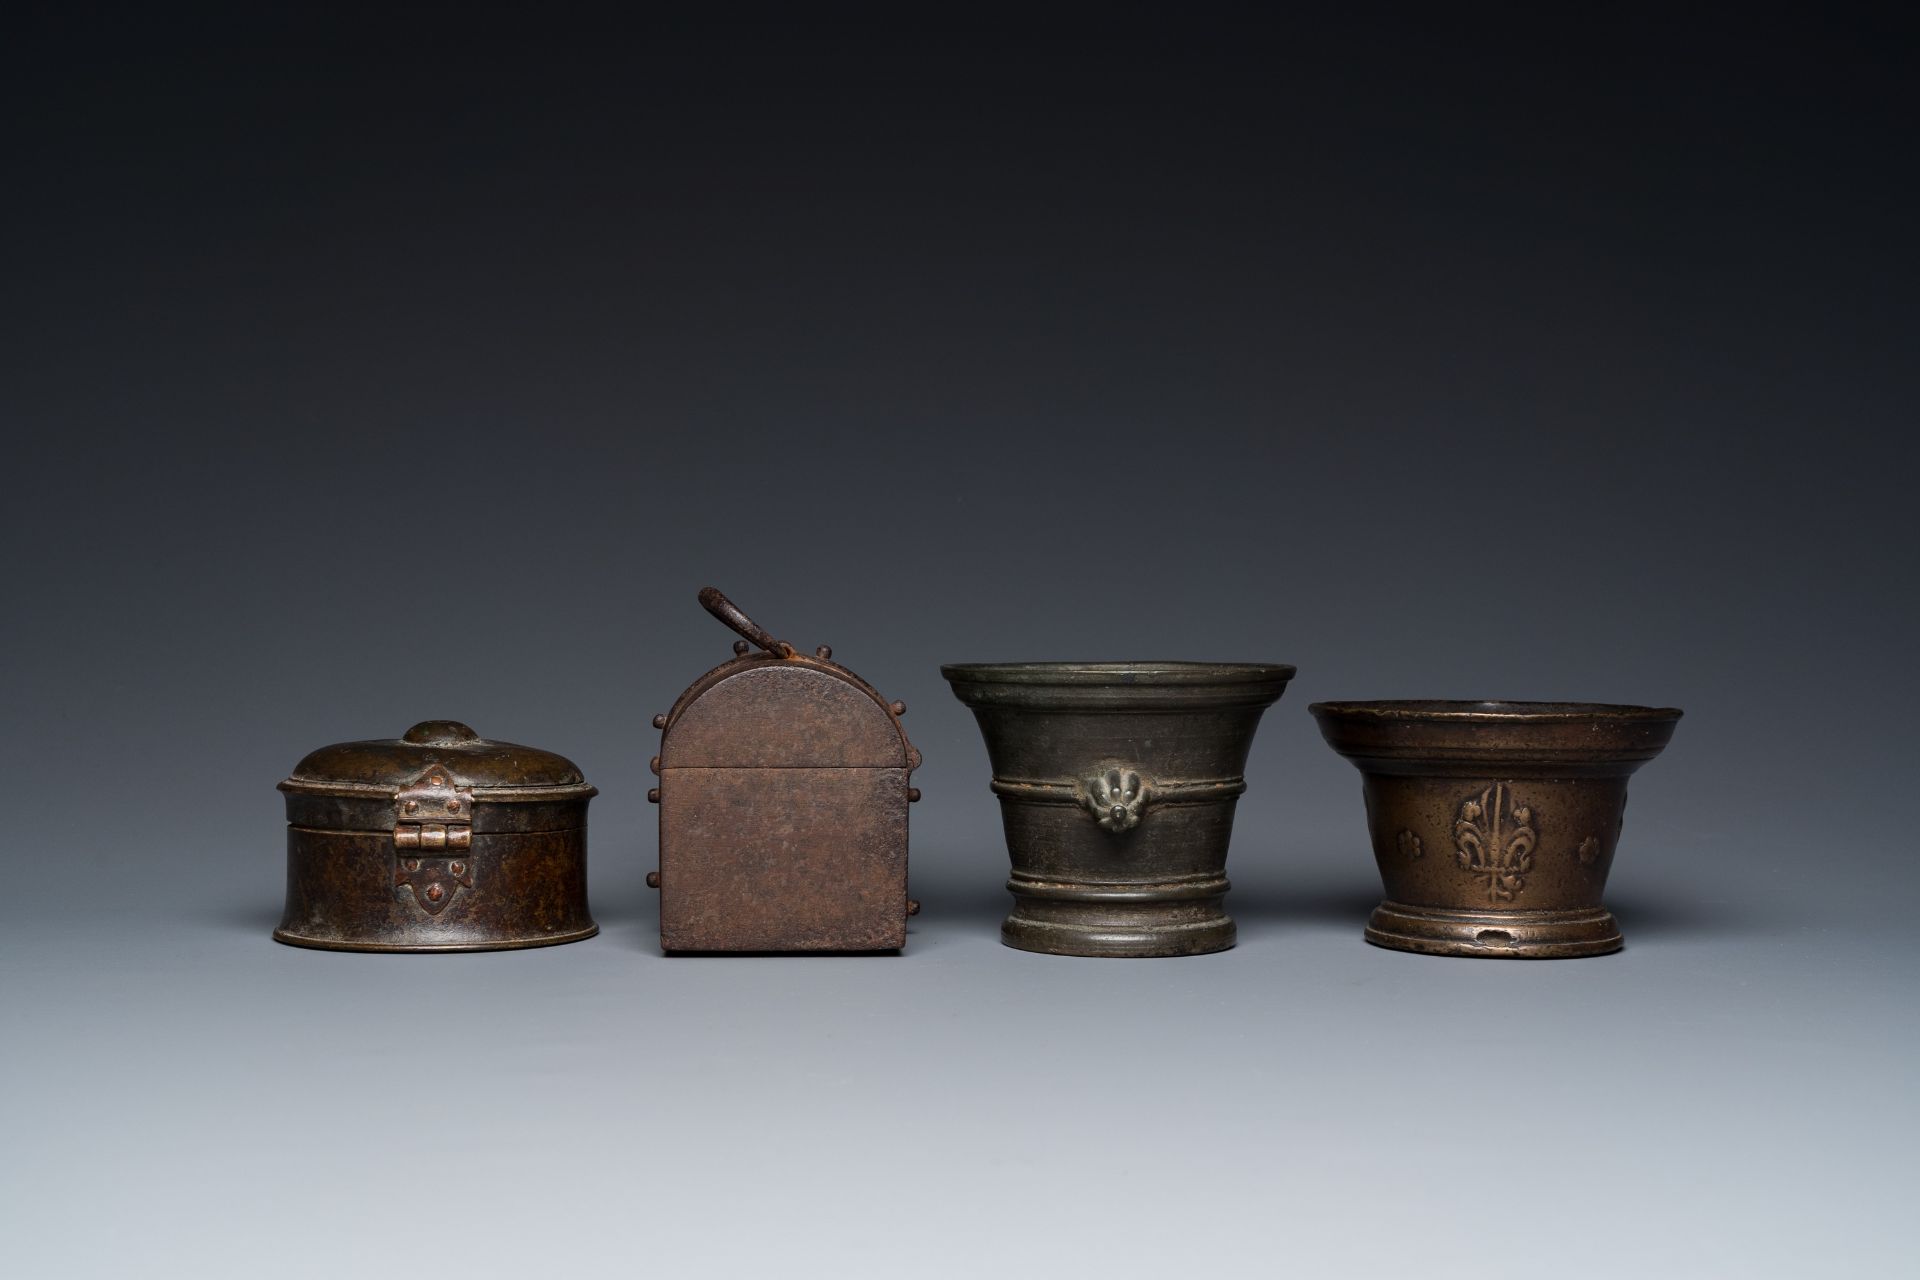 Two bronze mortars, a round lidded box and an iron casket, Western Europe, 16/17th C. - Image 5 of 9